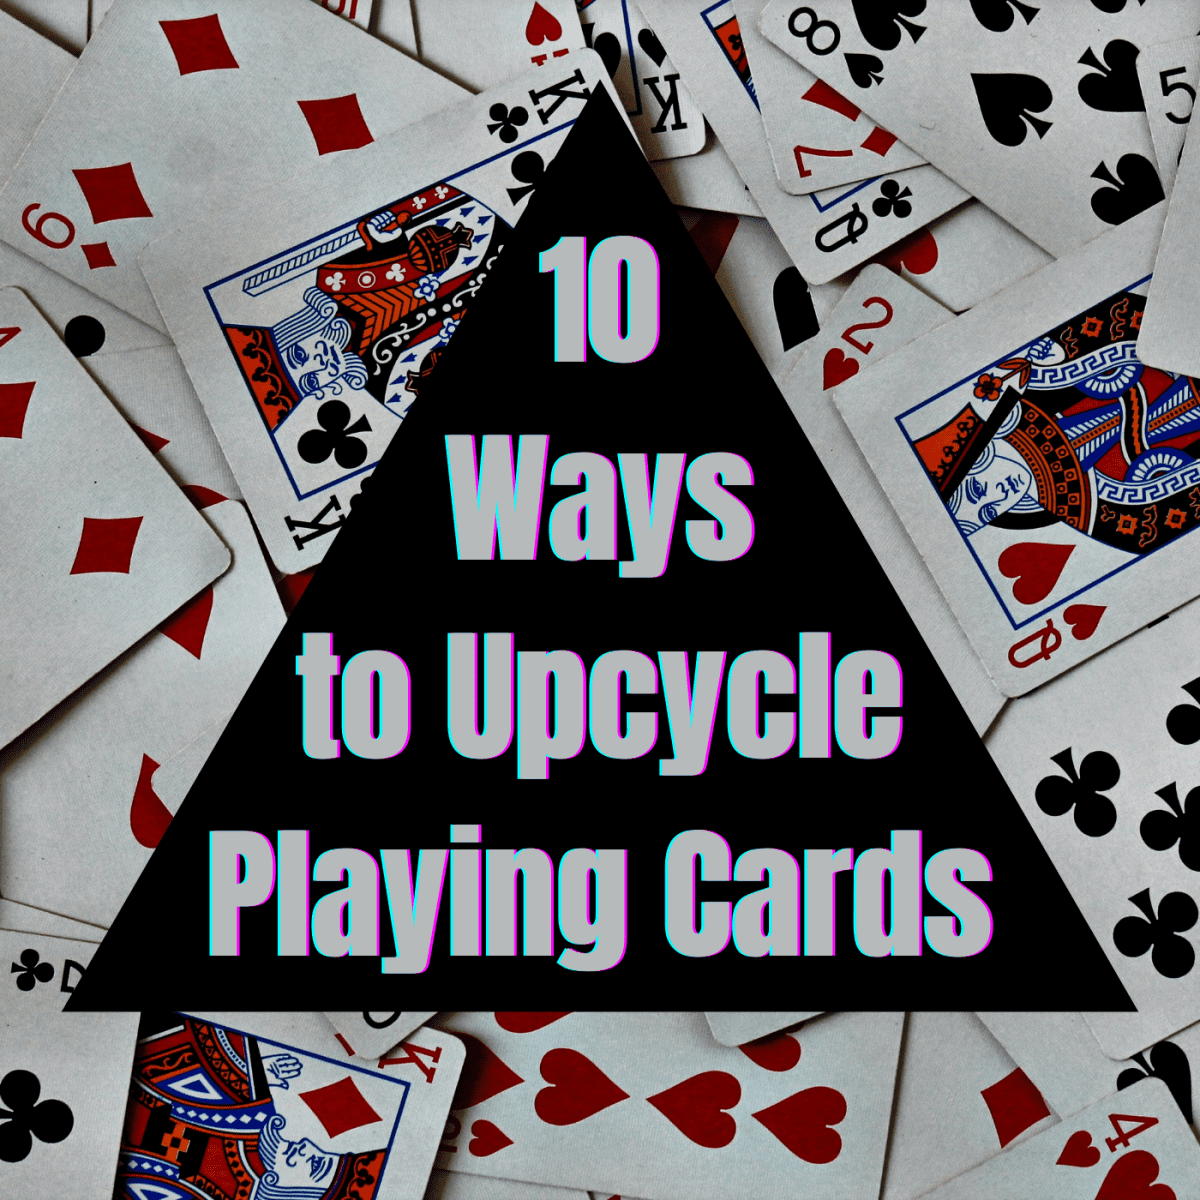 10 Creative Ways to Reuse Old Playing Cards - FeltMagnet